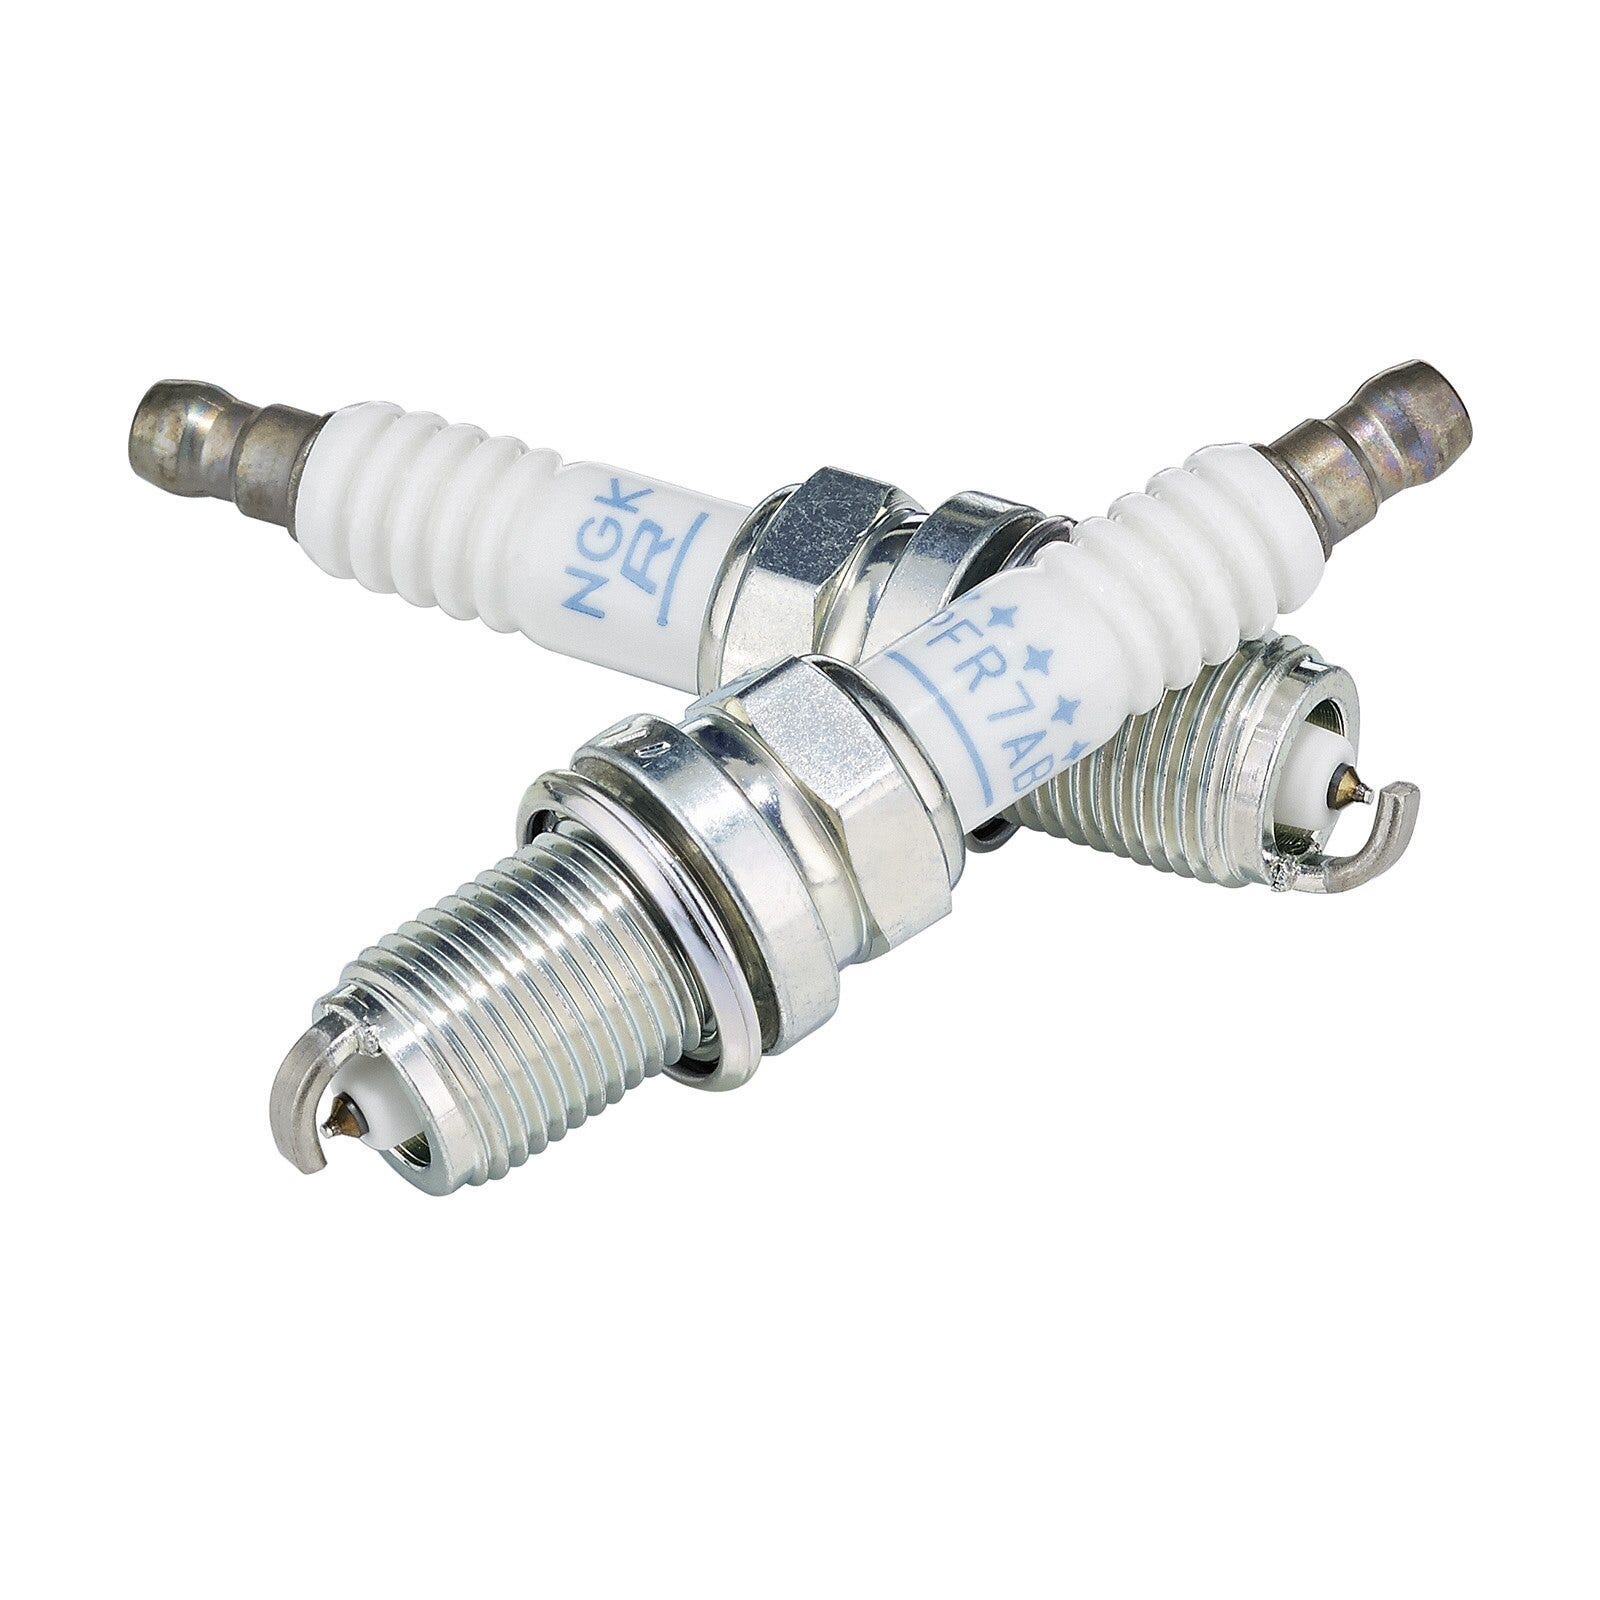 NGK Spark Plugs - 512060029 - The Parts Lodge